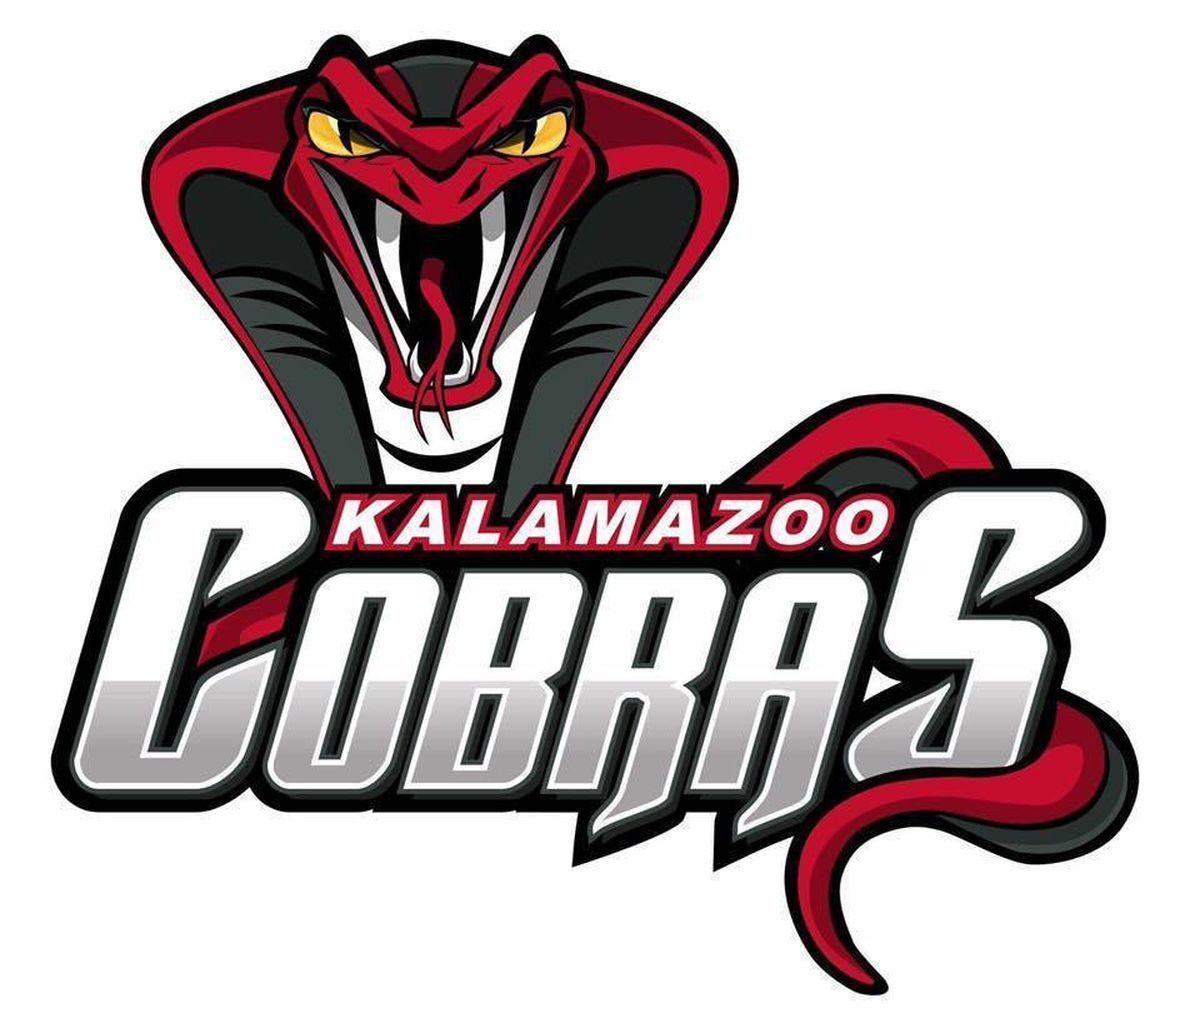 Kalamazoo Logo - Kalamazoo Cobras, Try-Out Dates, Logo, First Game Date Released ...